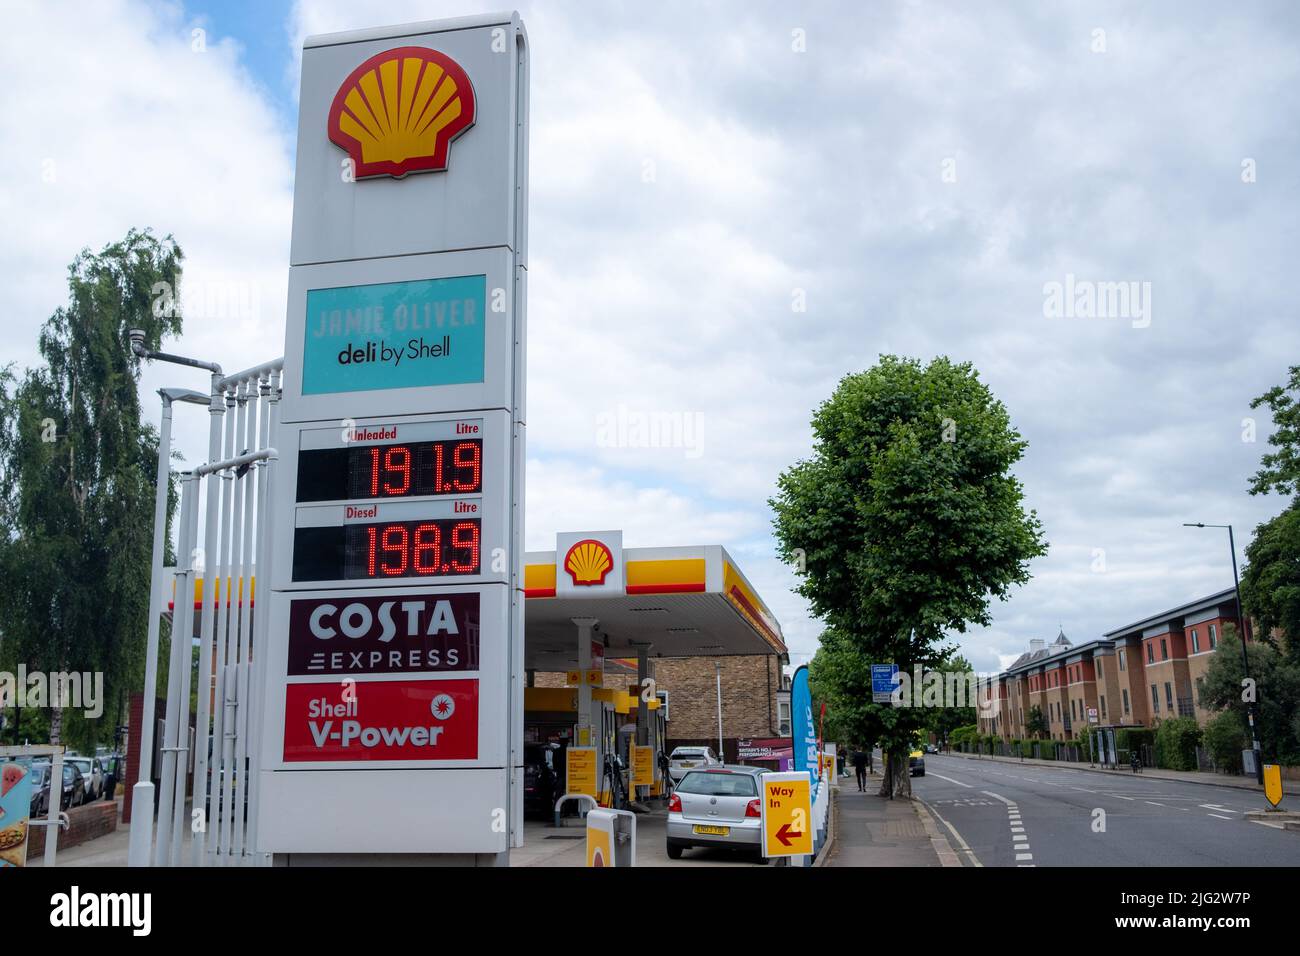 London- June 2022: London - Shell service petrol station sign and prices Stock Photo